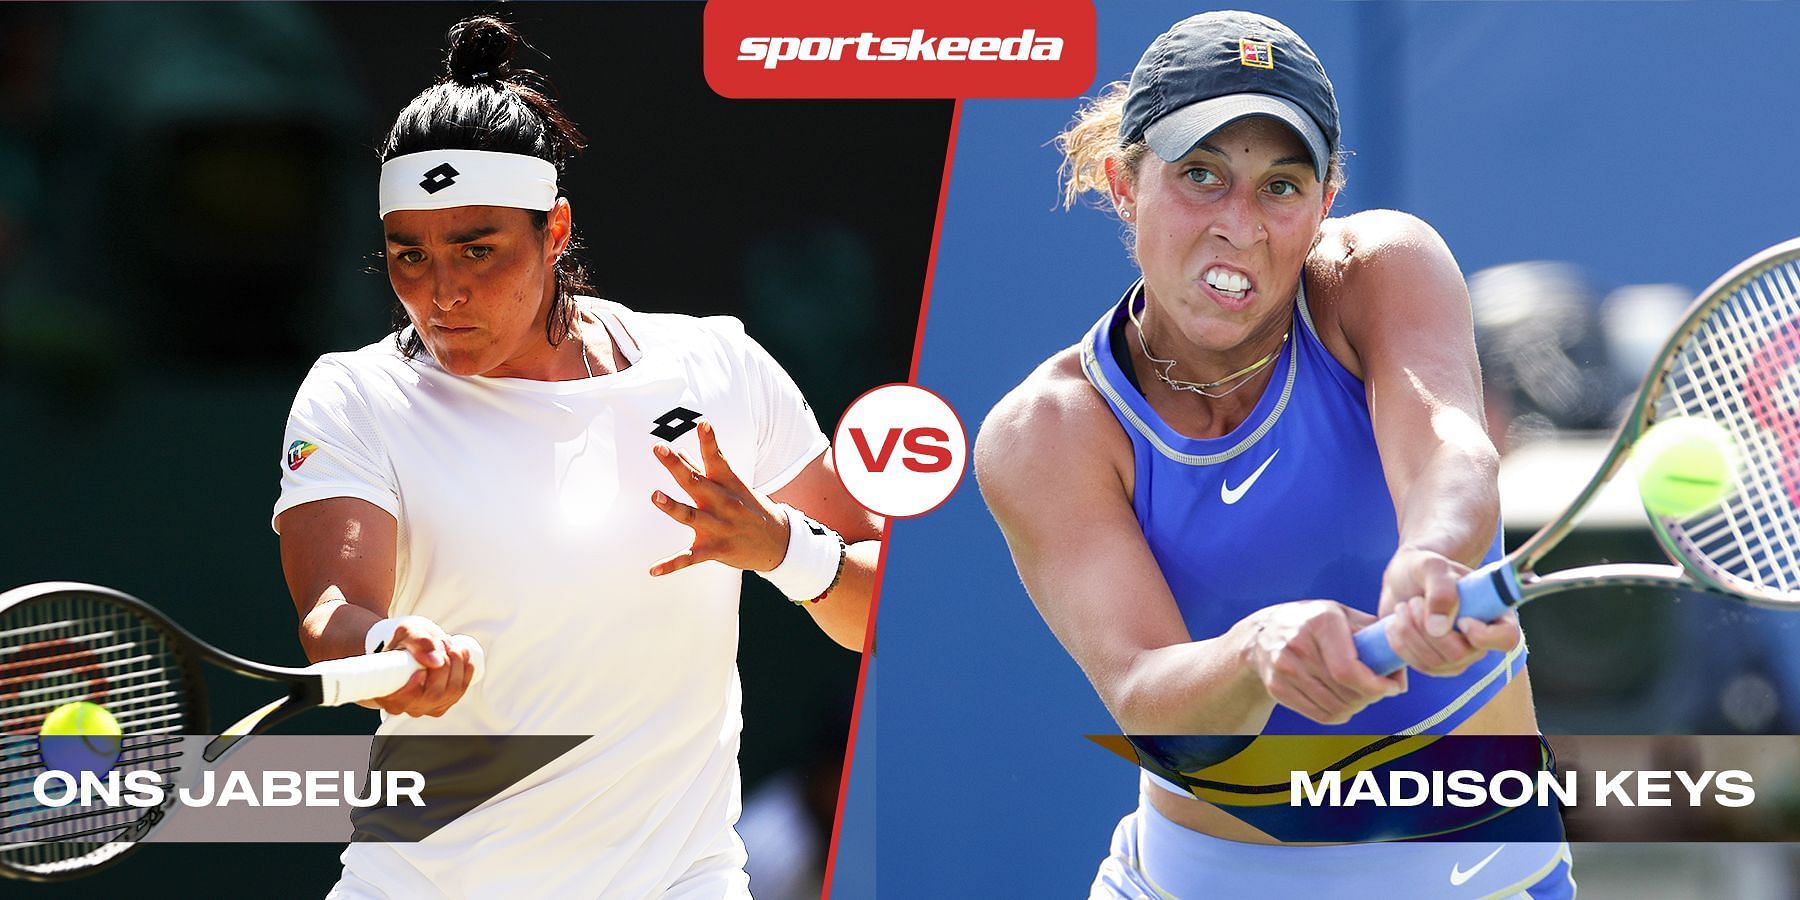 Ons Jabeur will face Madison Keys in the first round of the Silicon Valley Classic